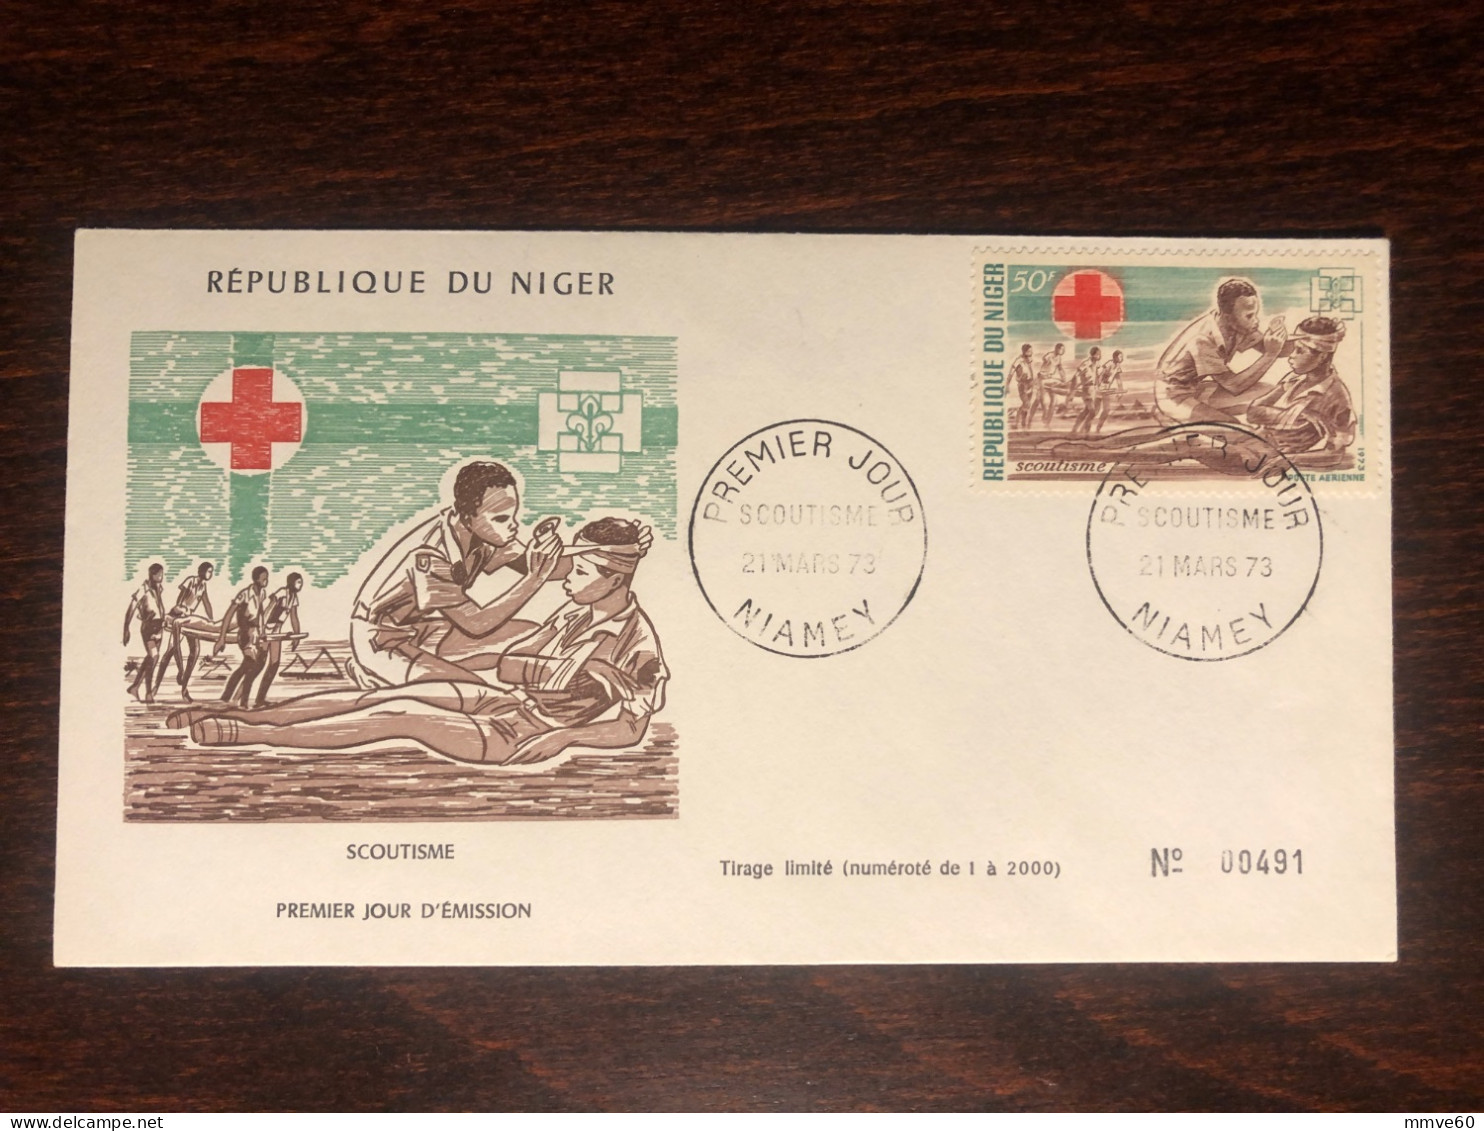 NIGER FDC COVER 1973 YEAR RED CROSS HEALTH MEDICINE STAMPS - Niger (1960-...)